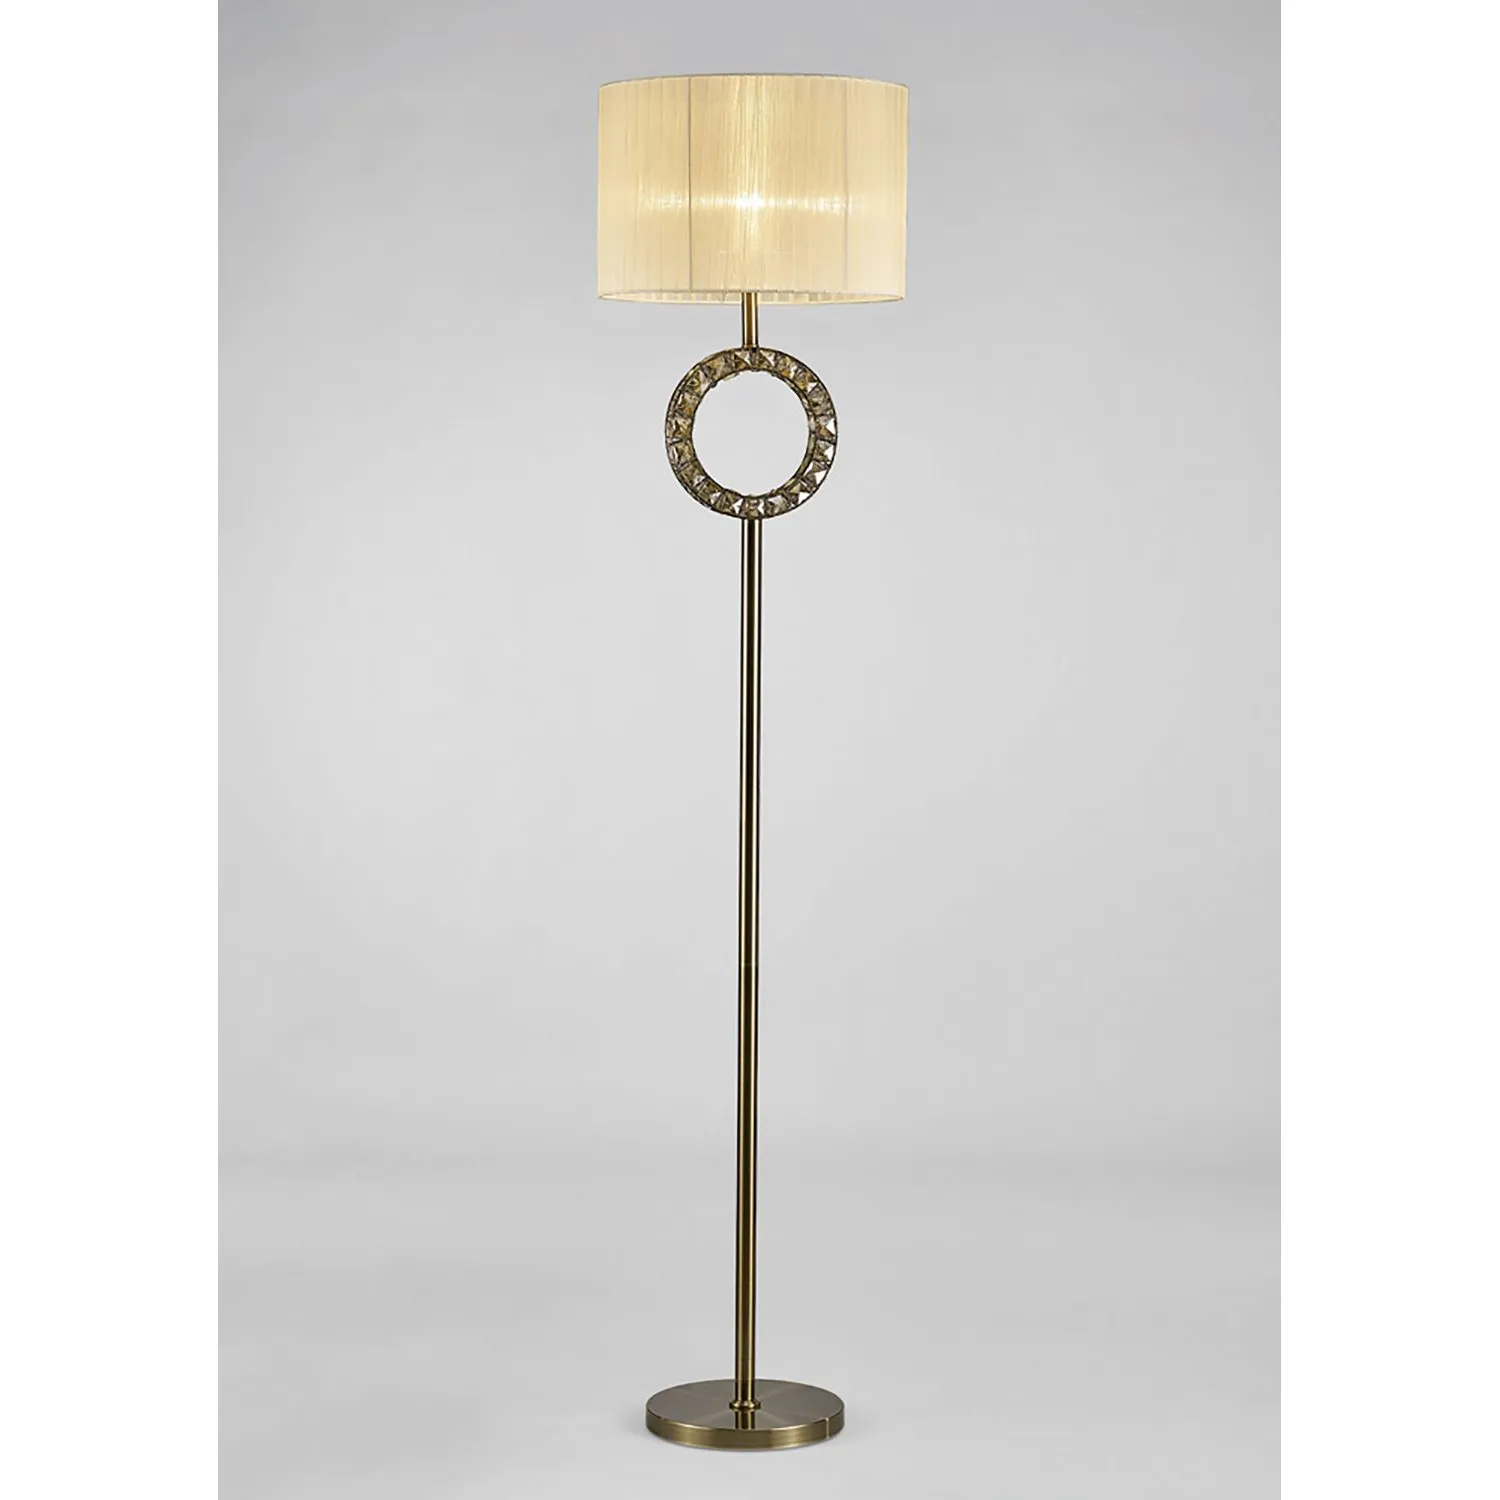 Florence Round Floor Lamp With Cream Shade 1 Light E27 Antique Brass Crystal Item Weight: 18.24kg